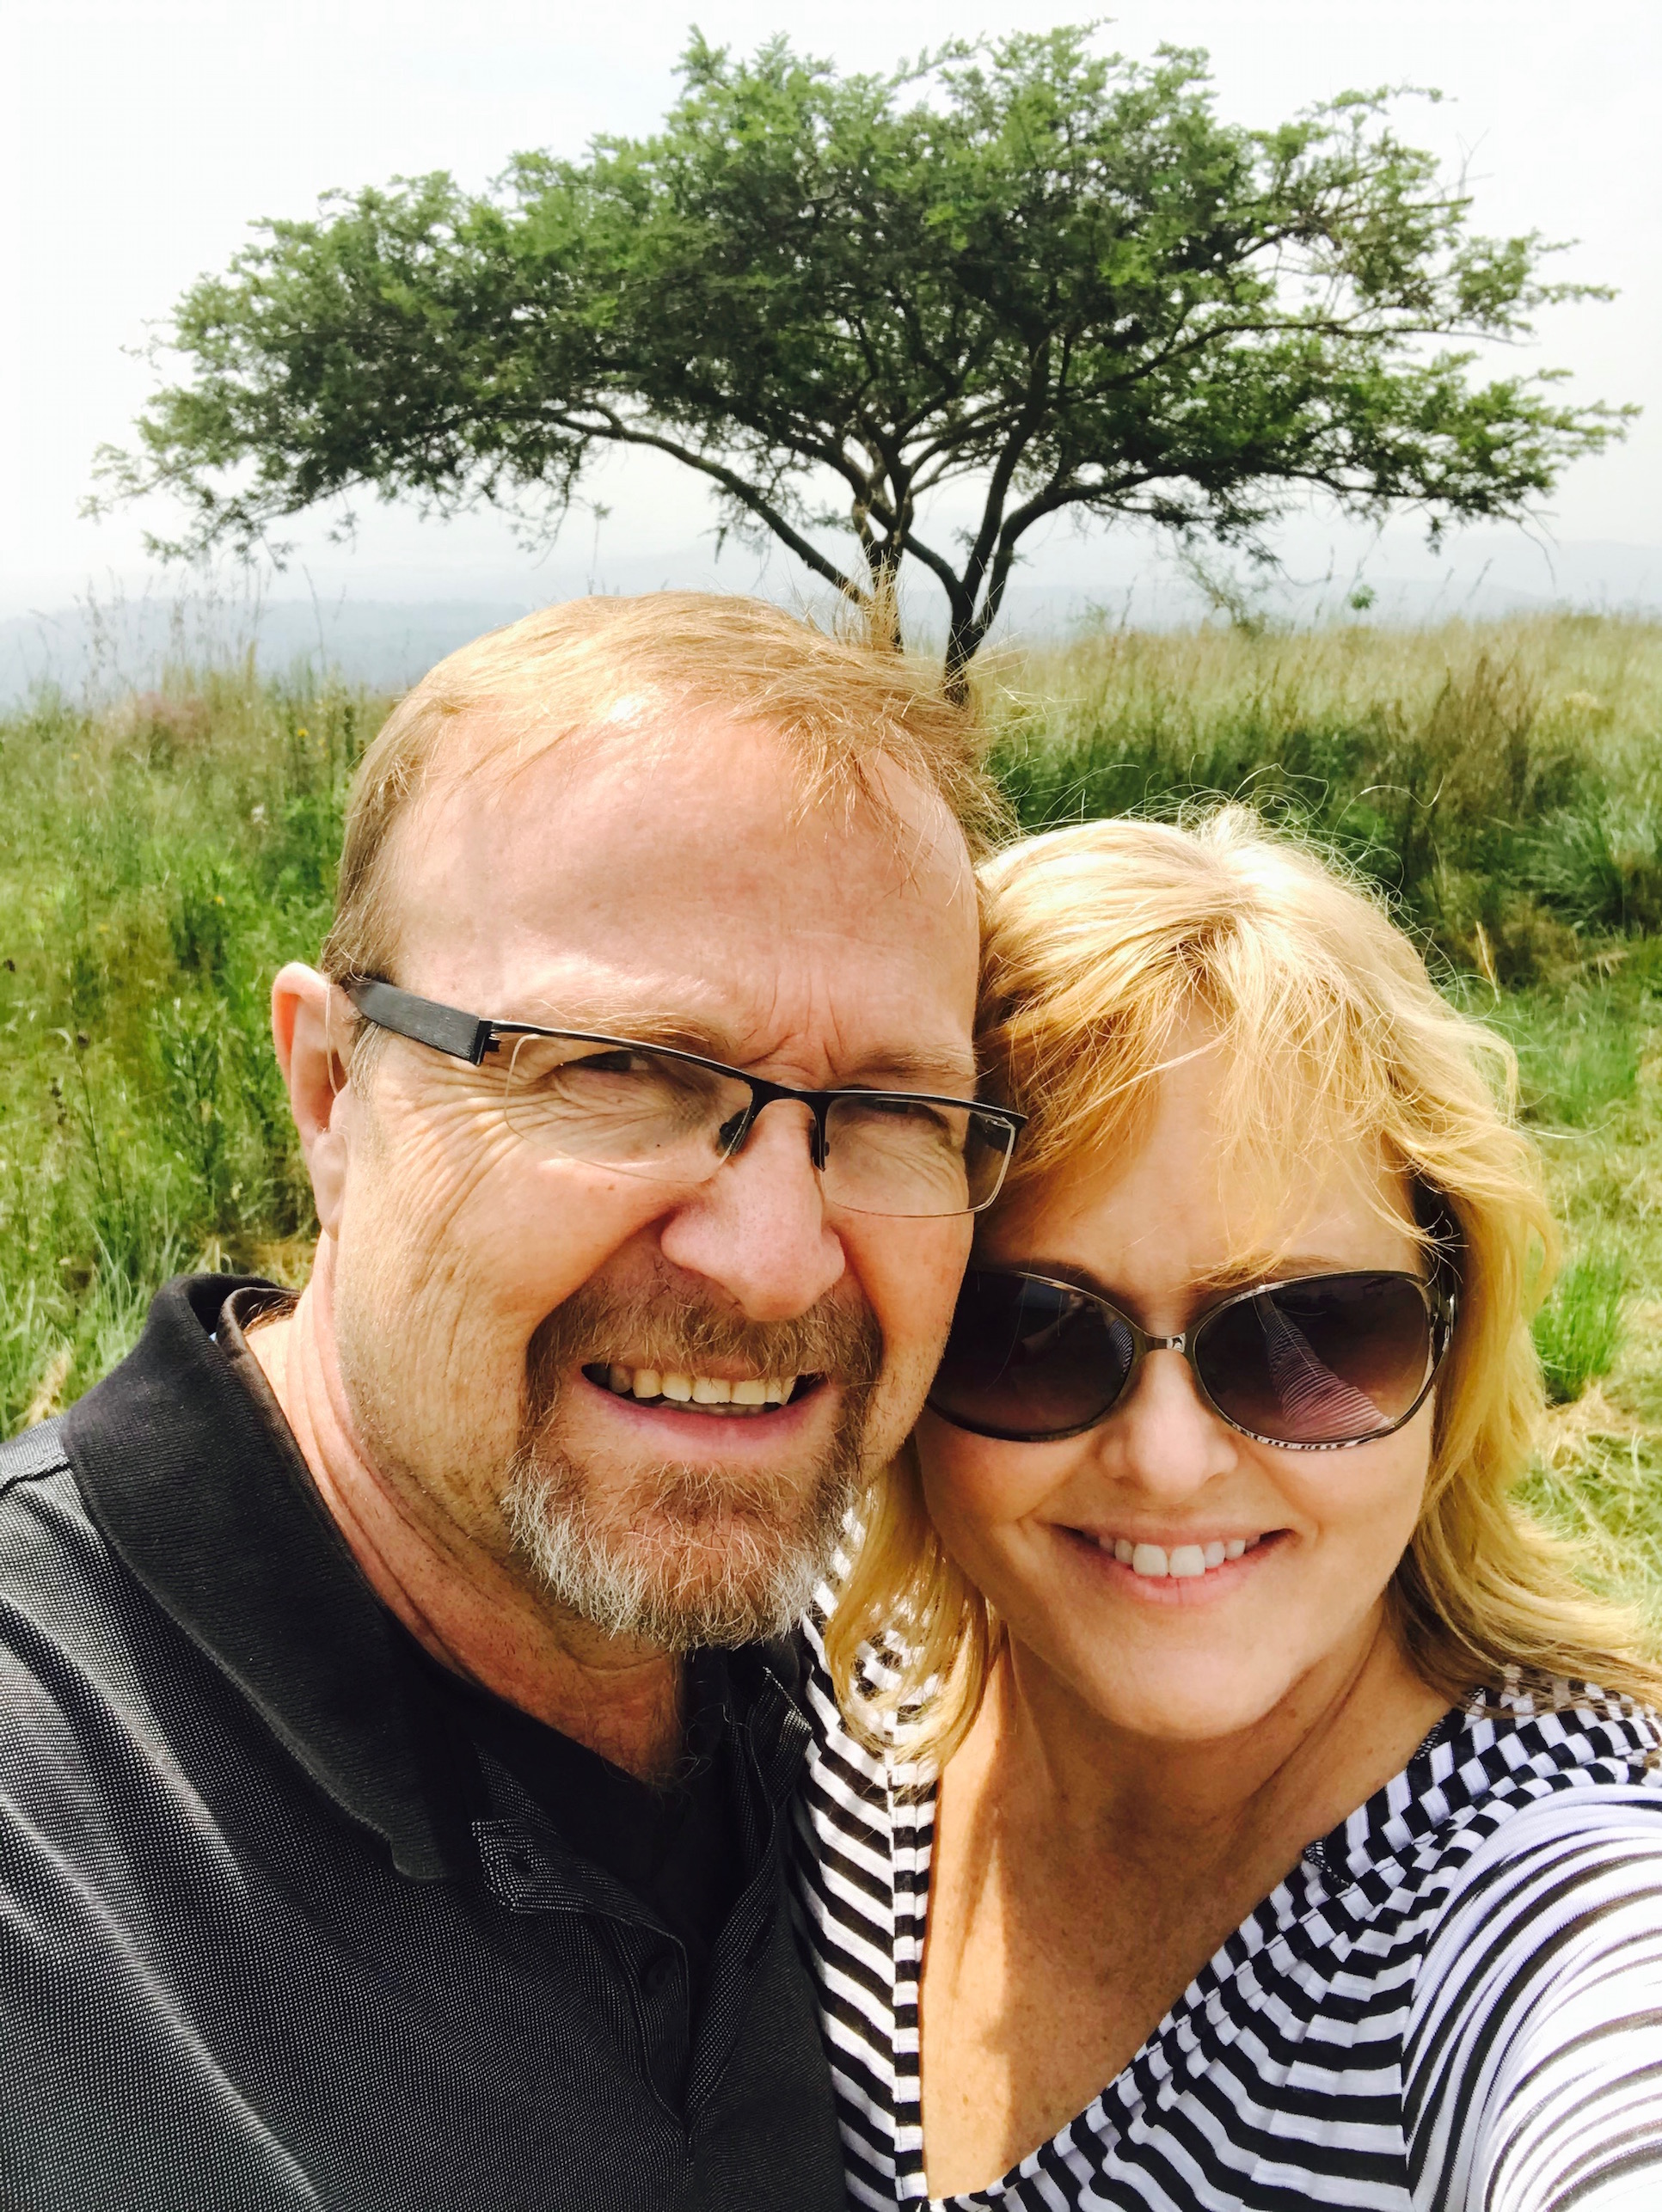 Our Experience in Rwanda: An Interview with Val & Ralph